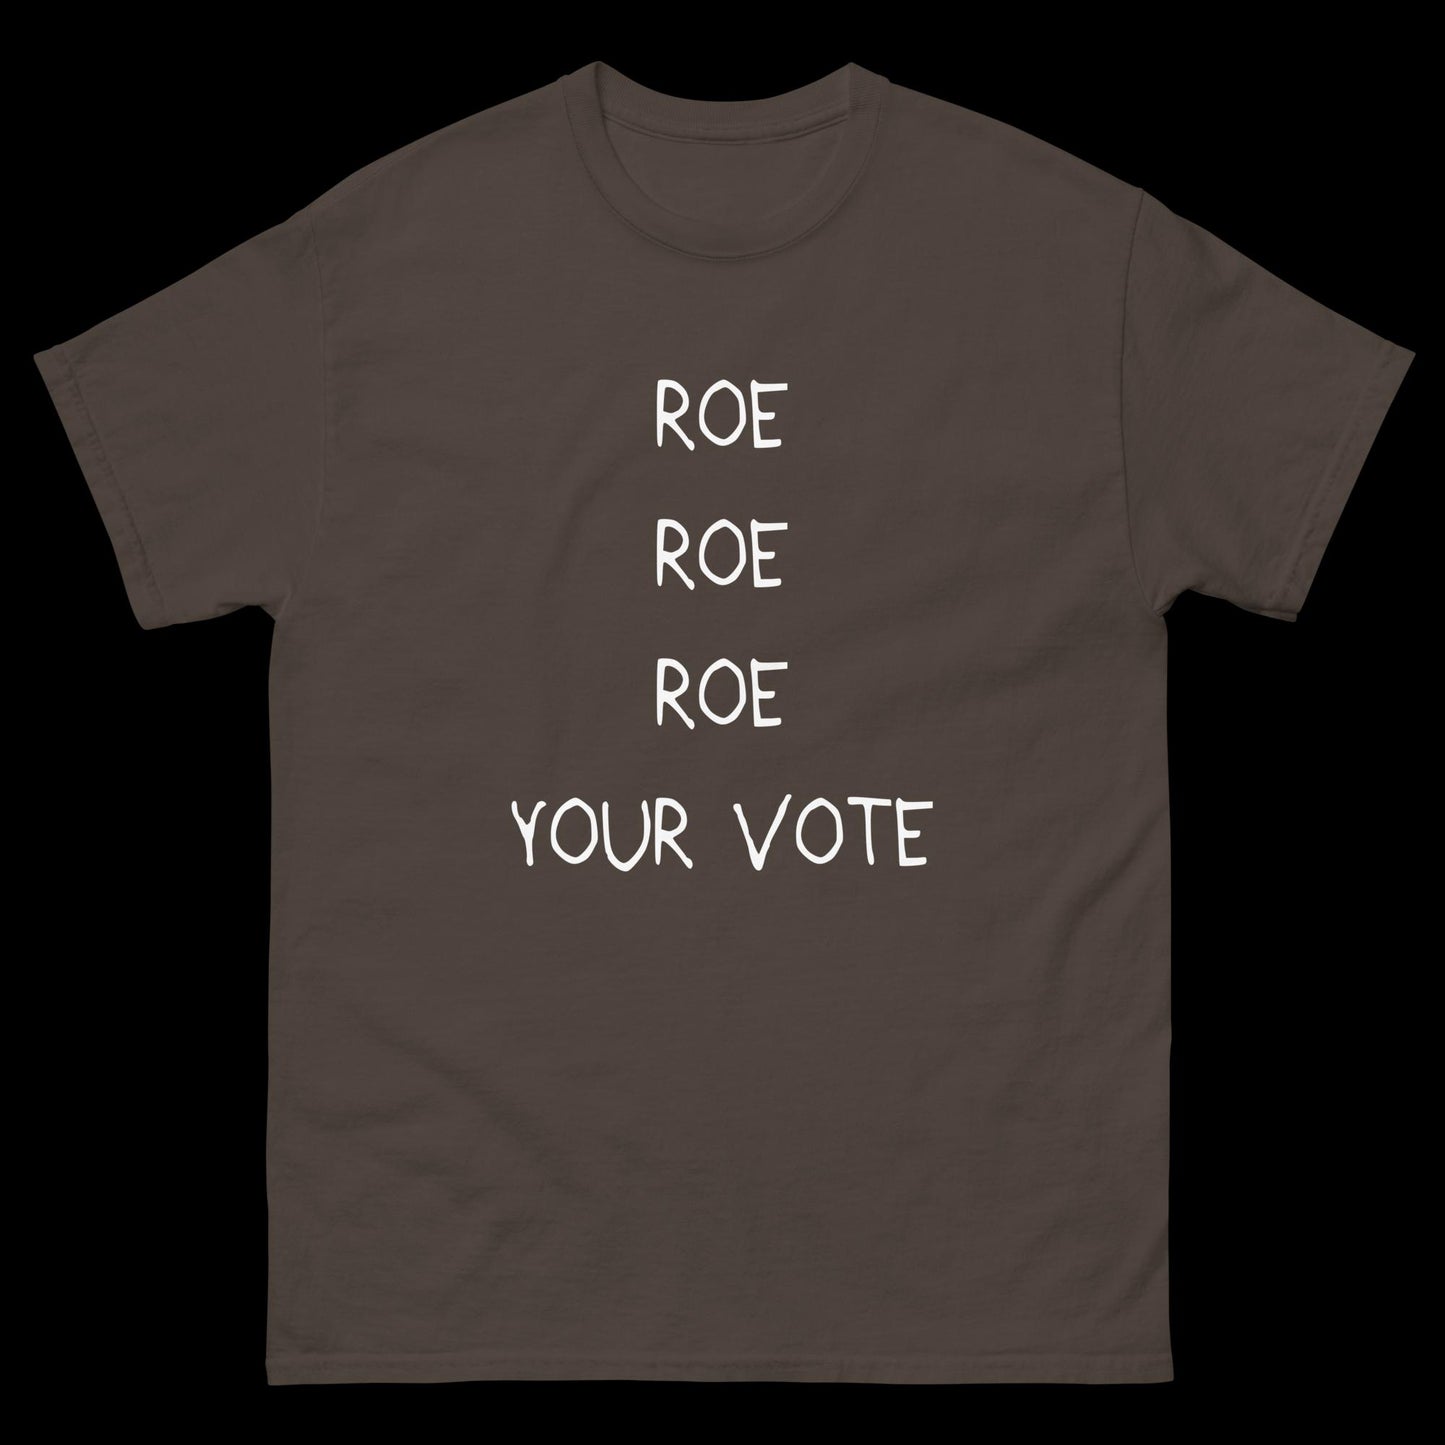 Roe Roe Roe Your Vote - Classic T-Shirt